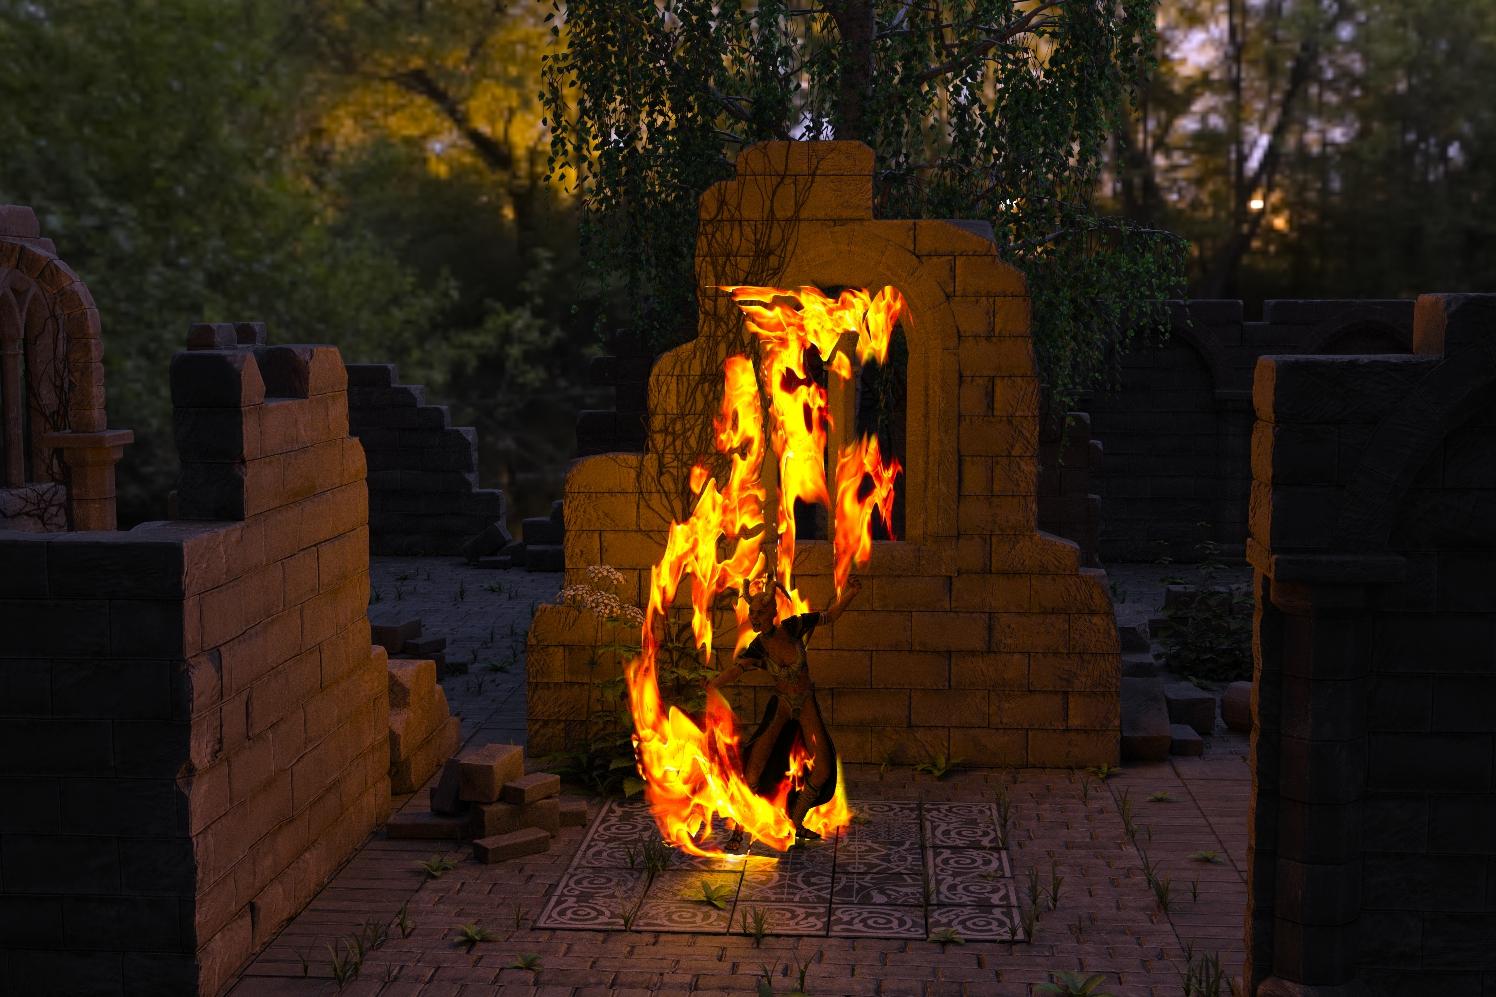 Condor Fireplace Awesome My Wips Renders and Animations Page 3 Daz 3d forums